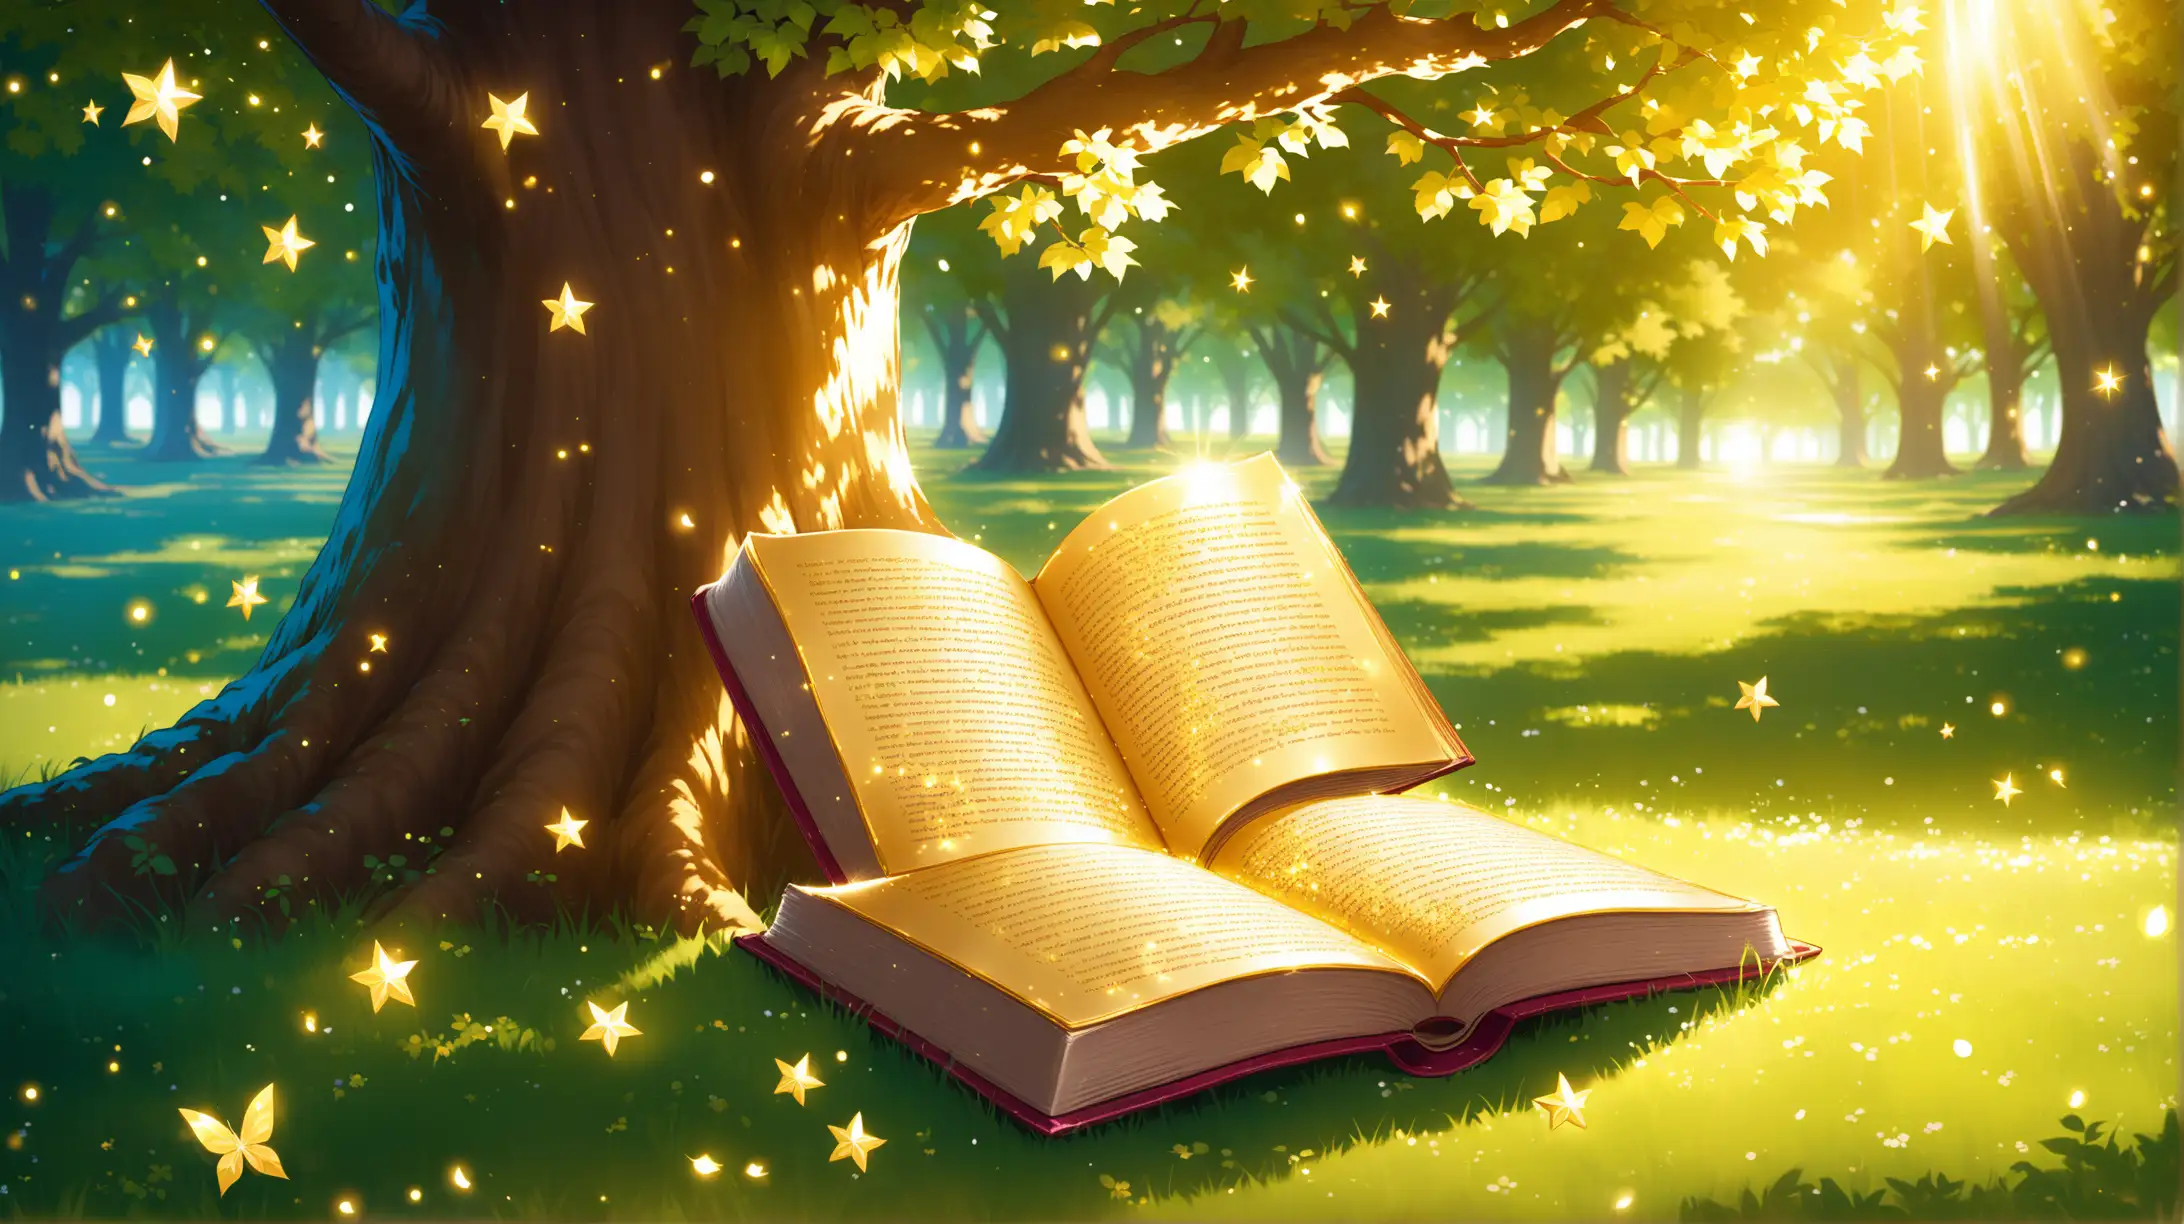 magical book with shimmering golden pages under a tree
